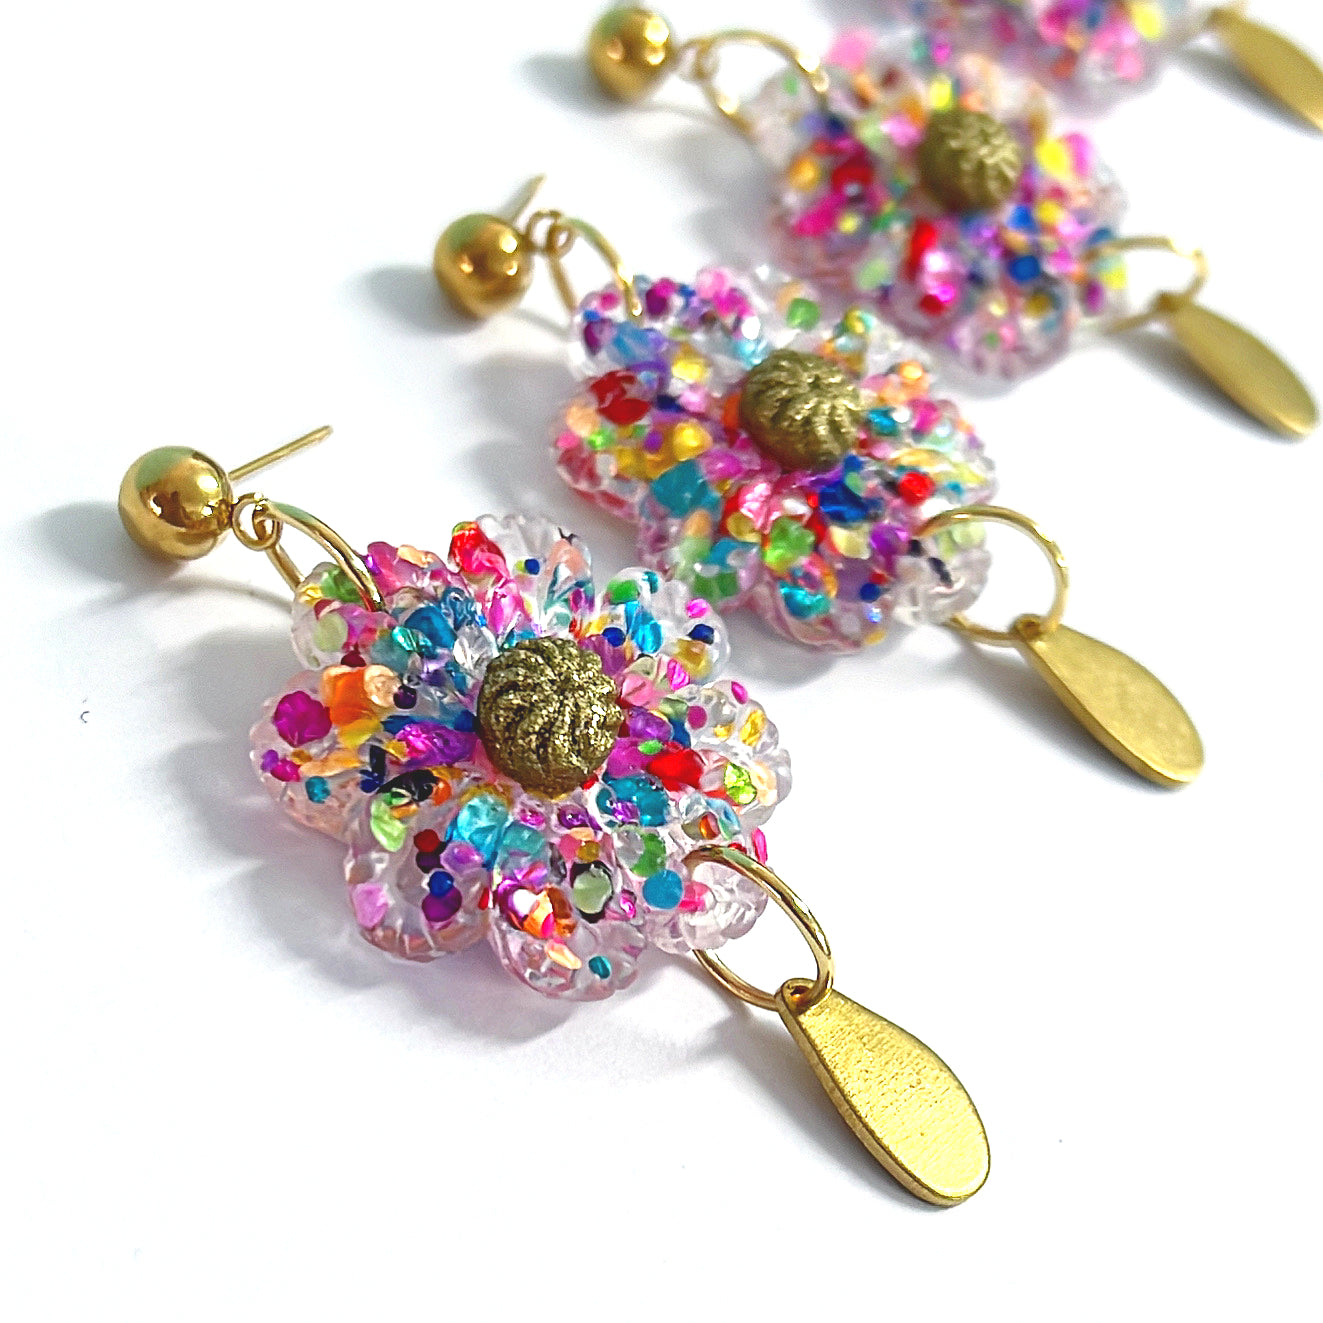 CRAZY FOR DAISY : KNITTED BLOOM : Handmade Stud-top DROP Earrings